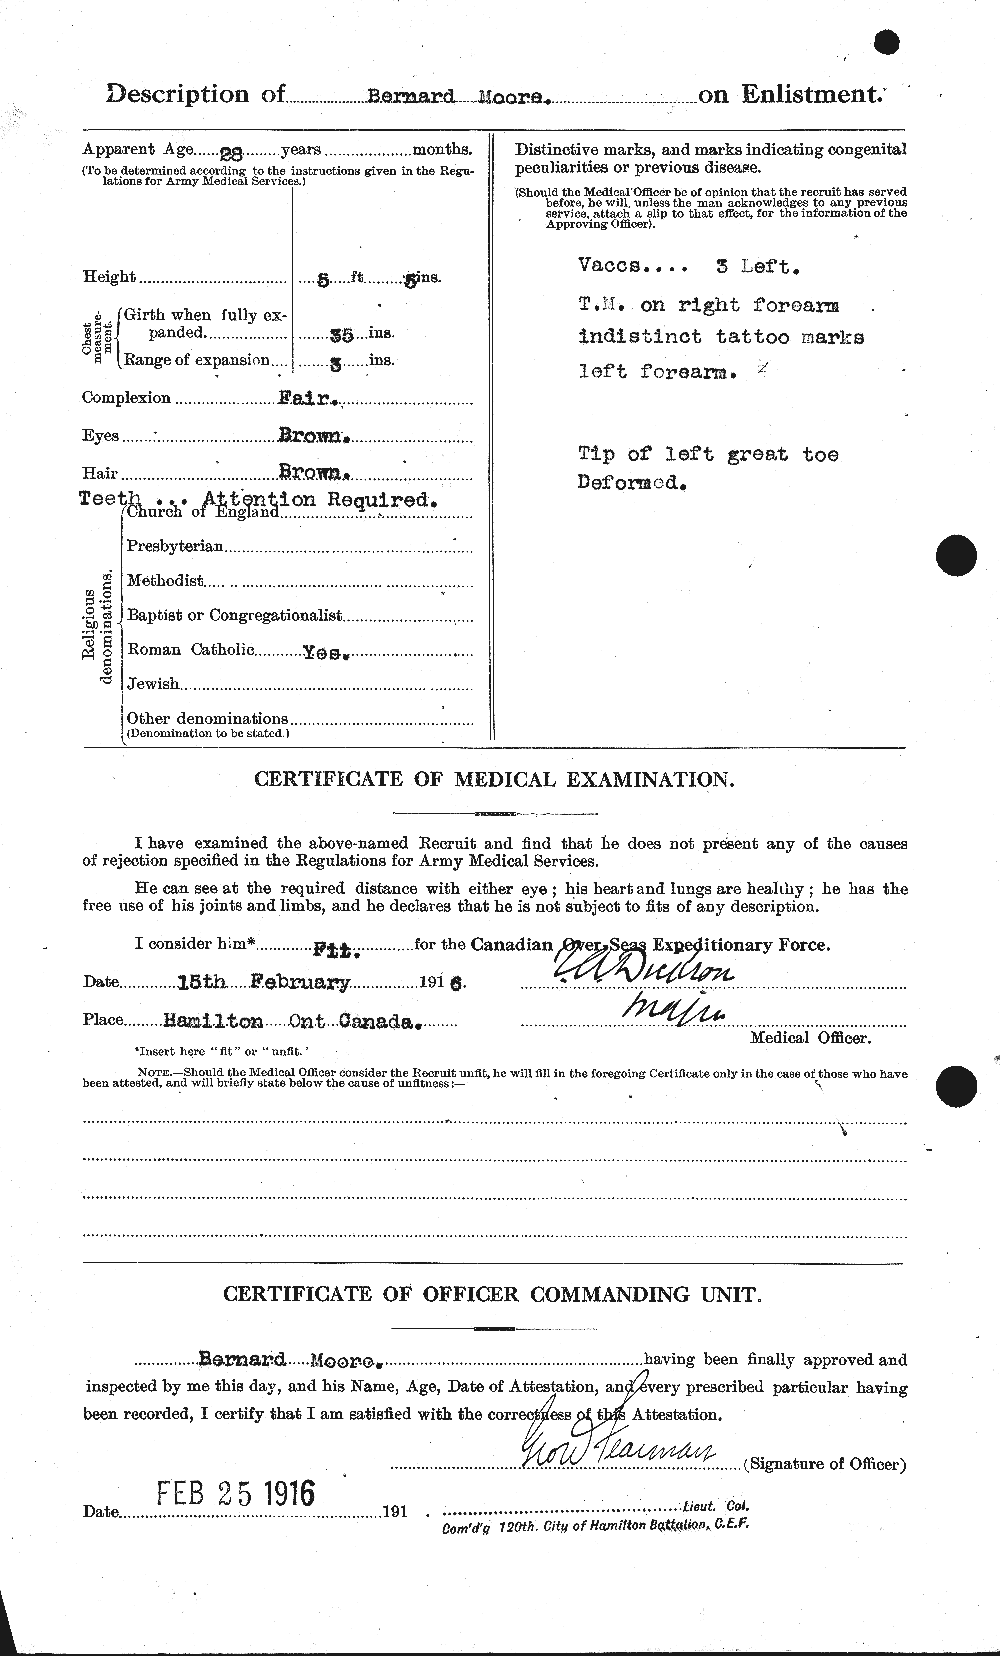 Personnel Records of the First World War - CEF 506463b